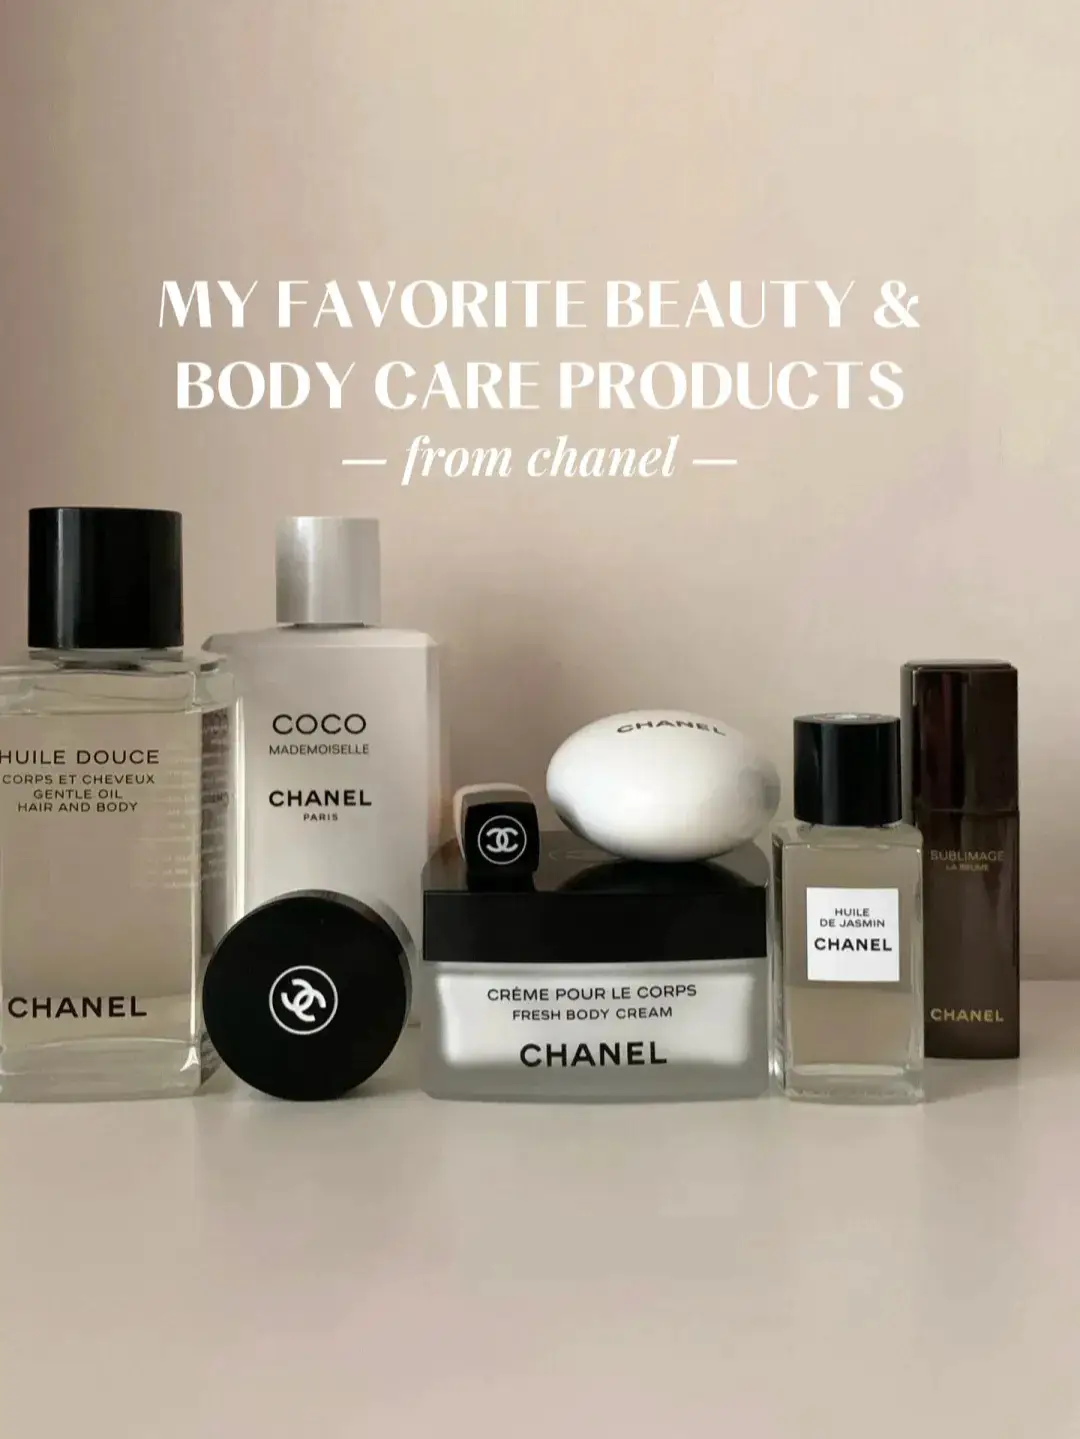 my favorite beauty & body care products, Gallery posted by Olivia Smith